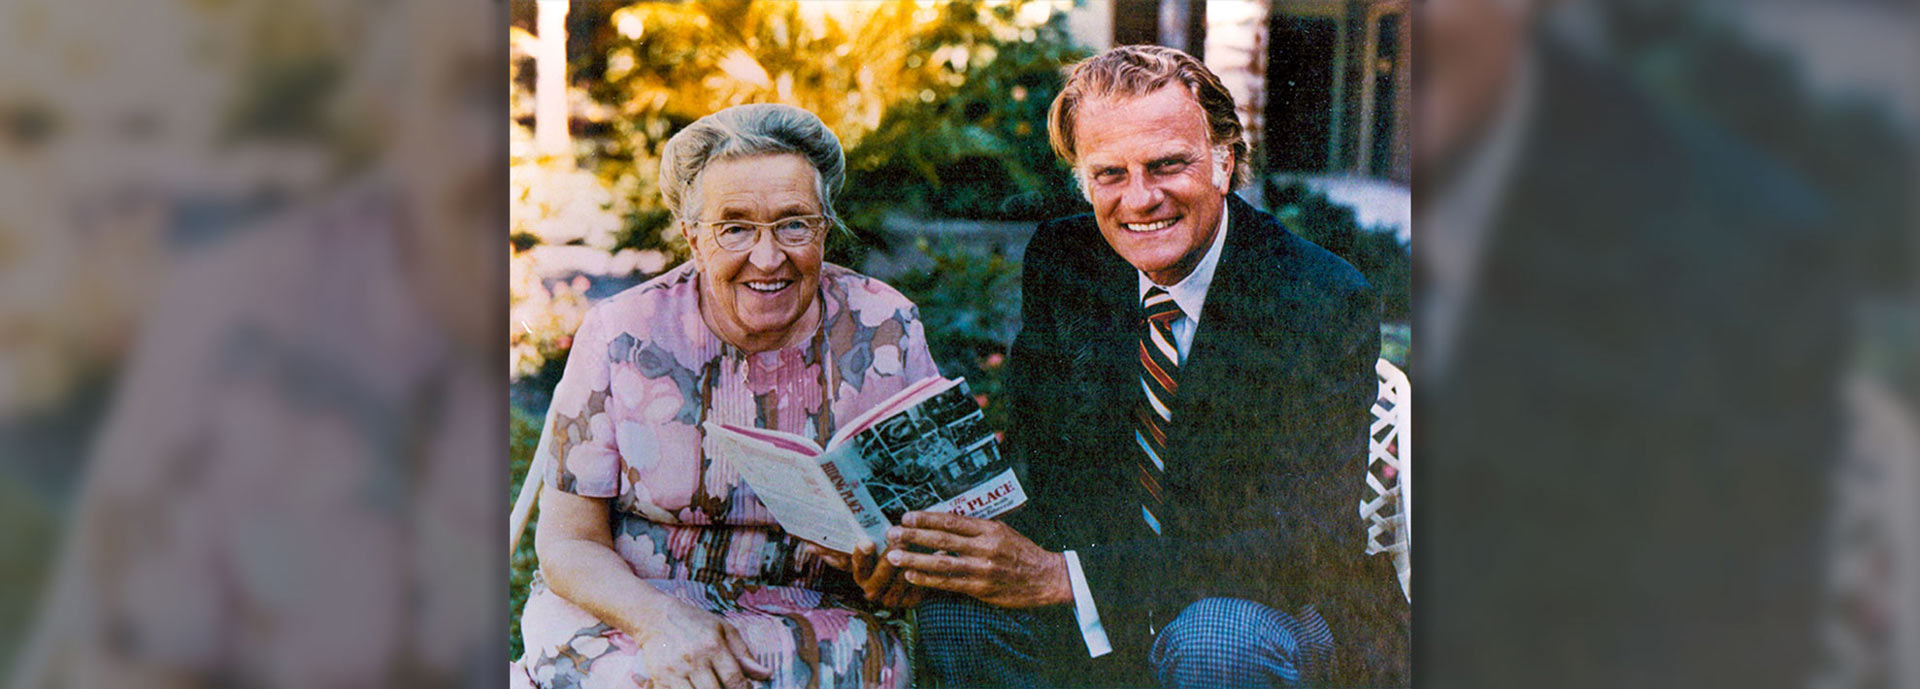 Corrie ten Boom and Billy Graham outside